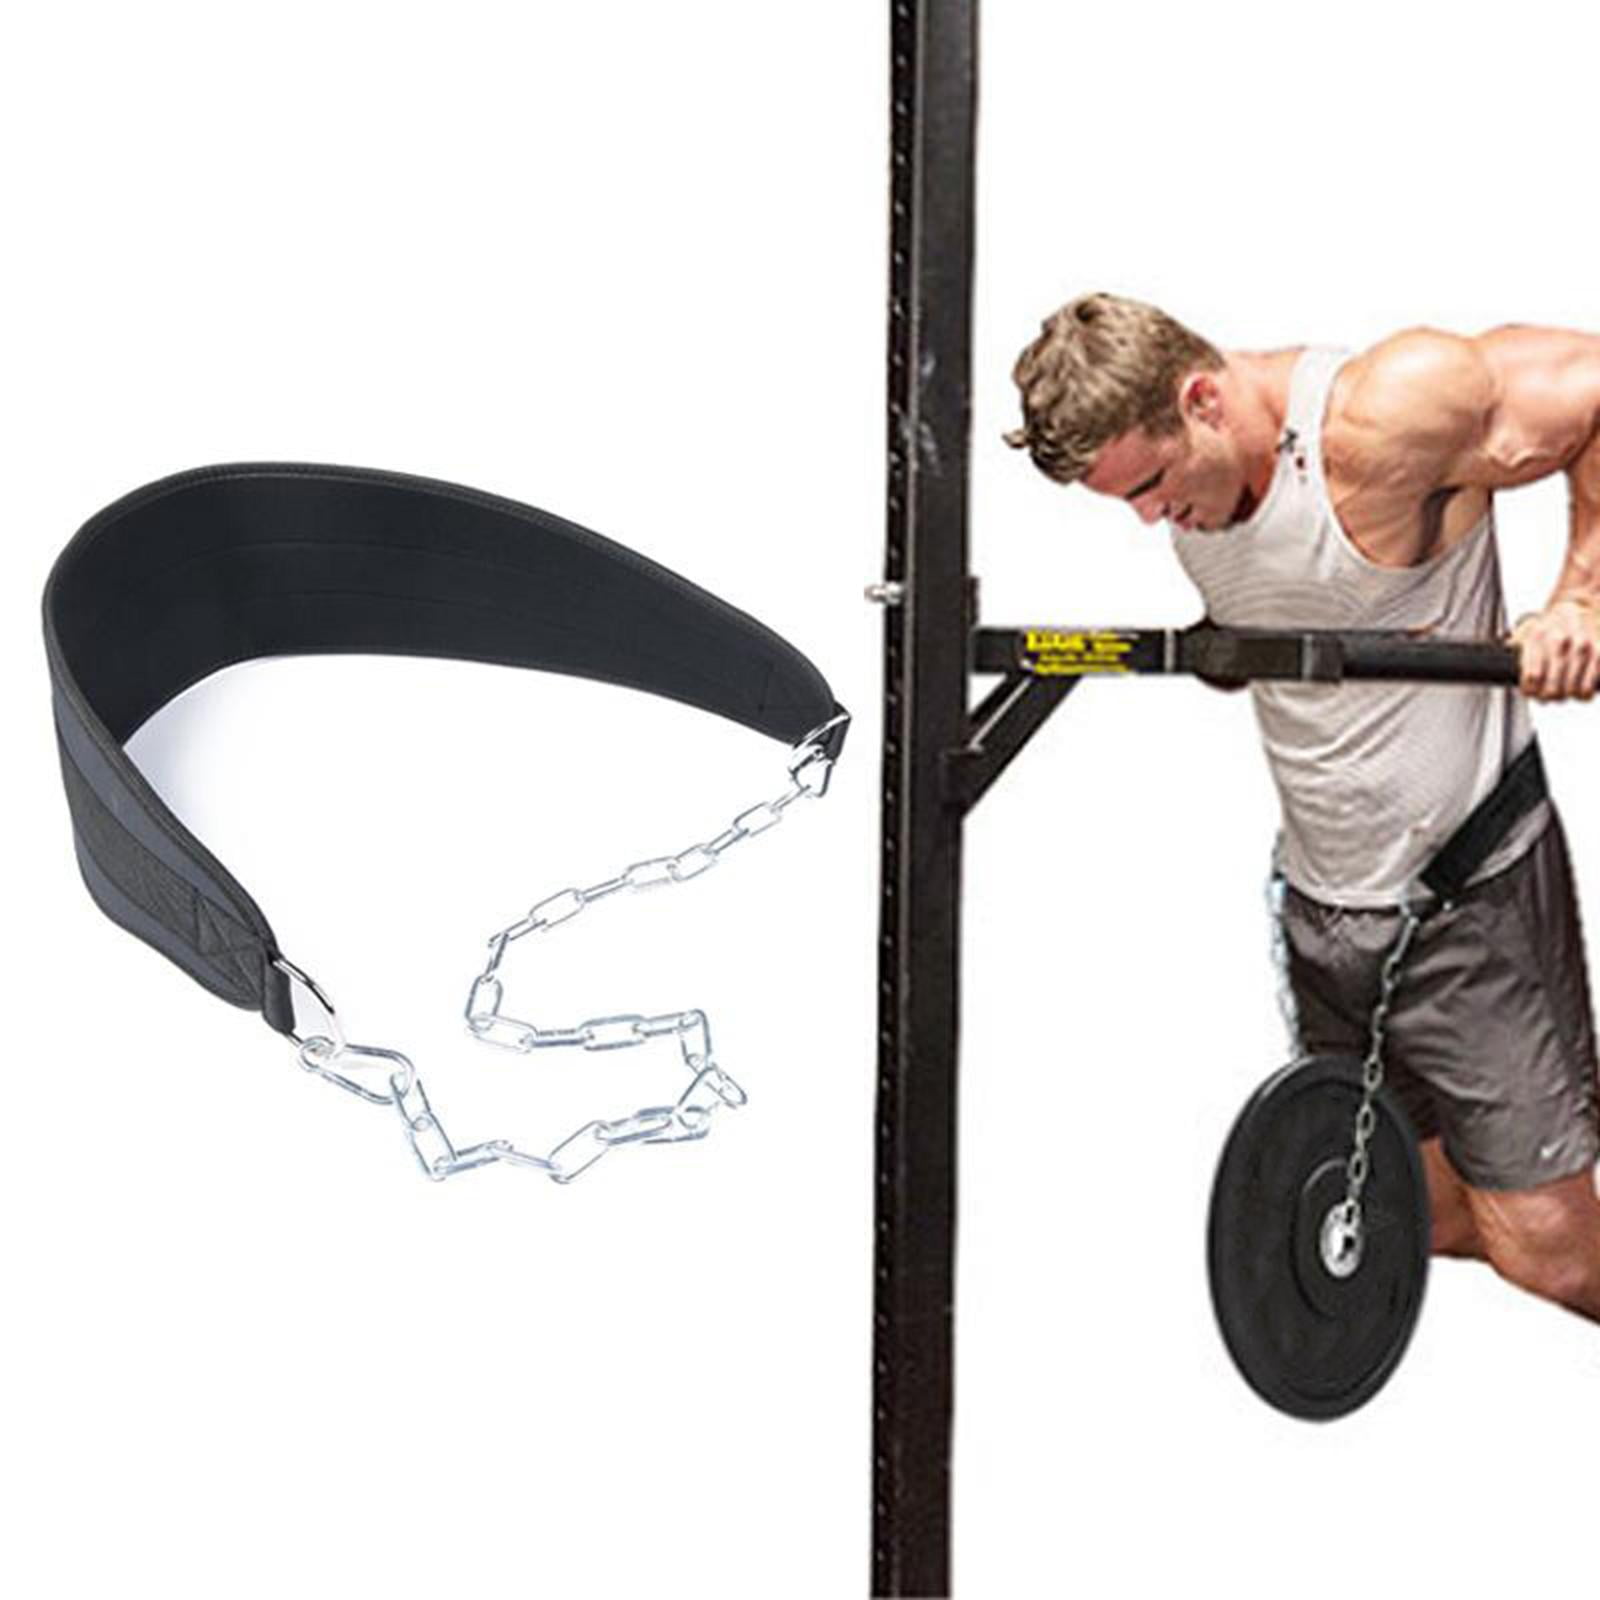 New Pro Dipping Belt Body Building Weight Lifting Chain Fitness Gym Training 